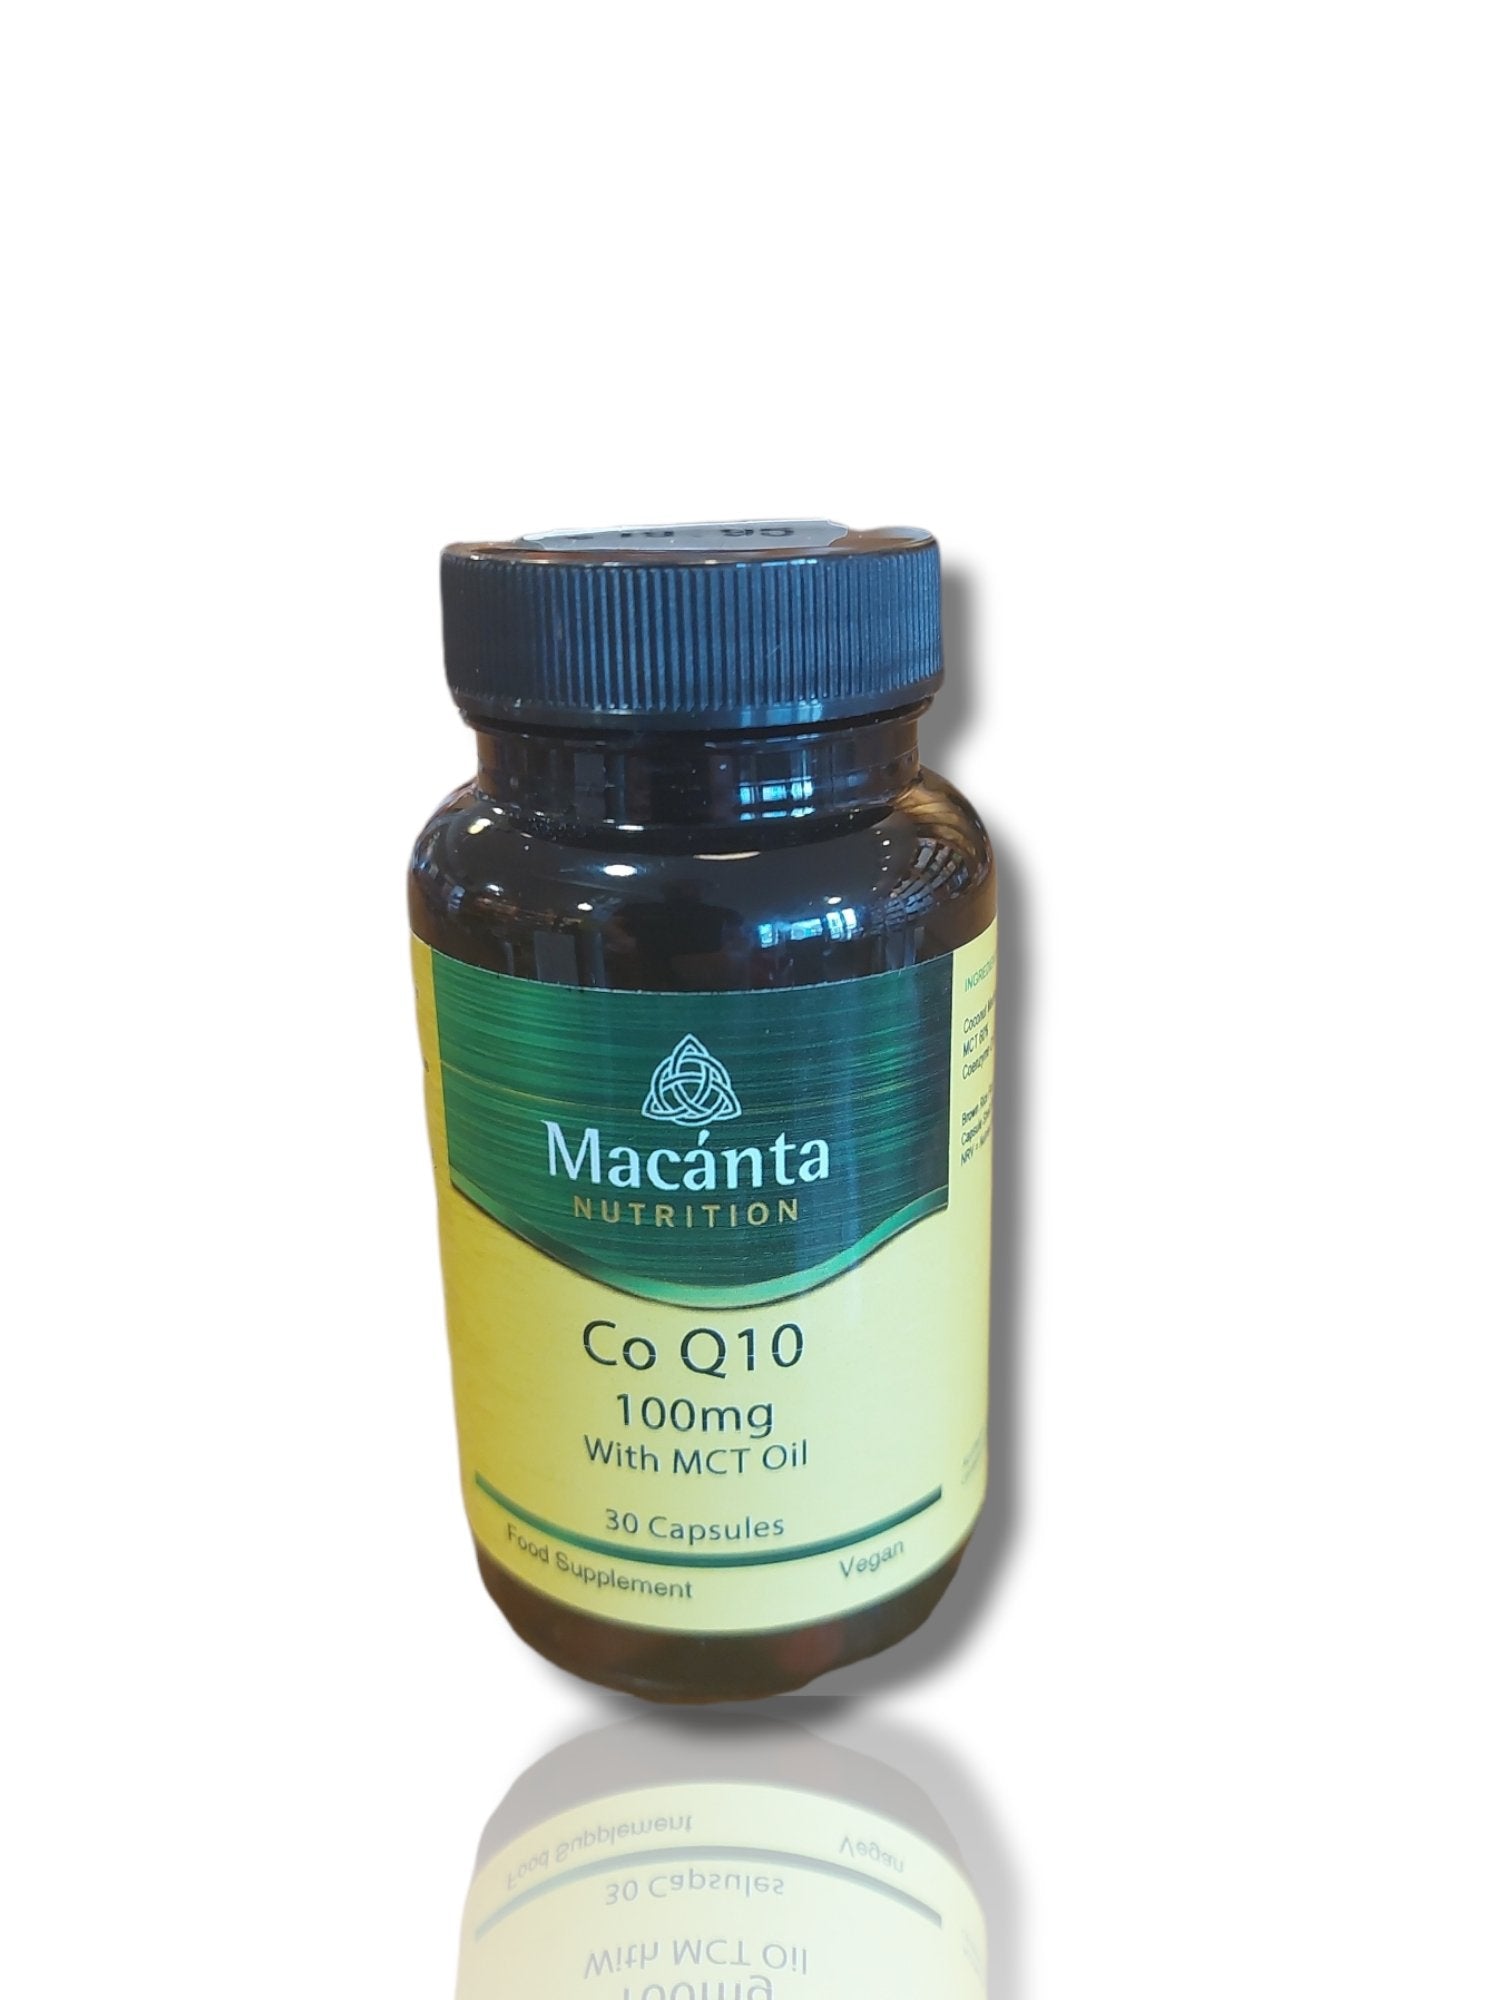 Macanta Co10 100mg with MCT Oil 30 cap - HealthyLiving.ie